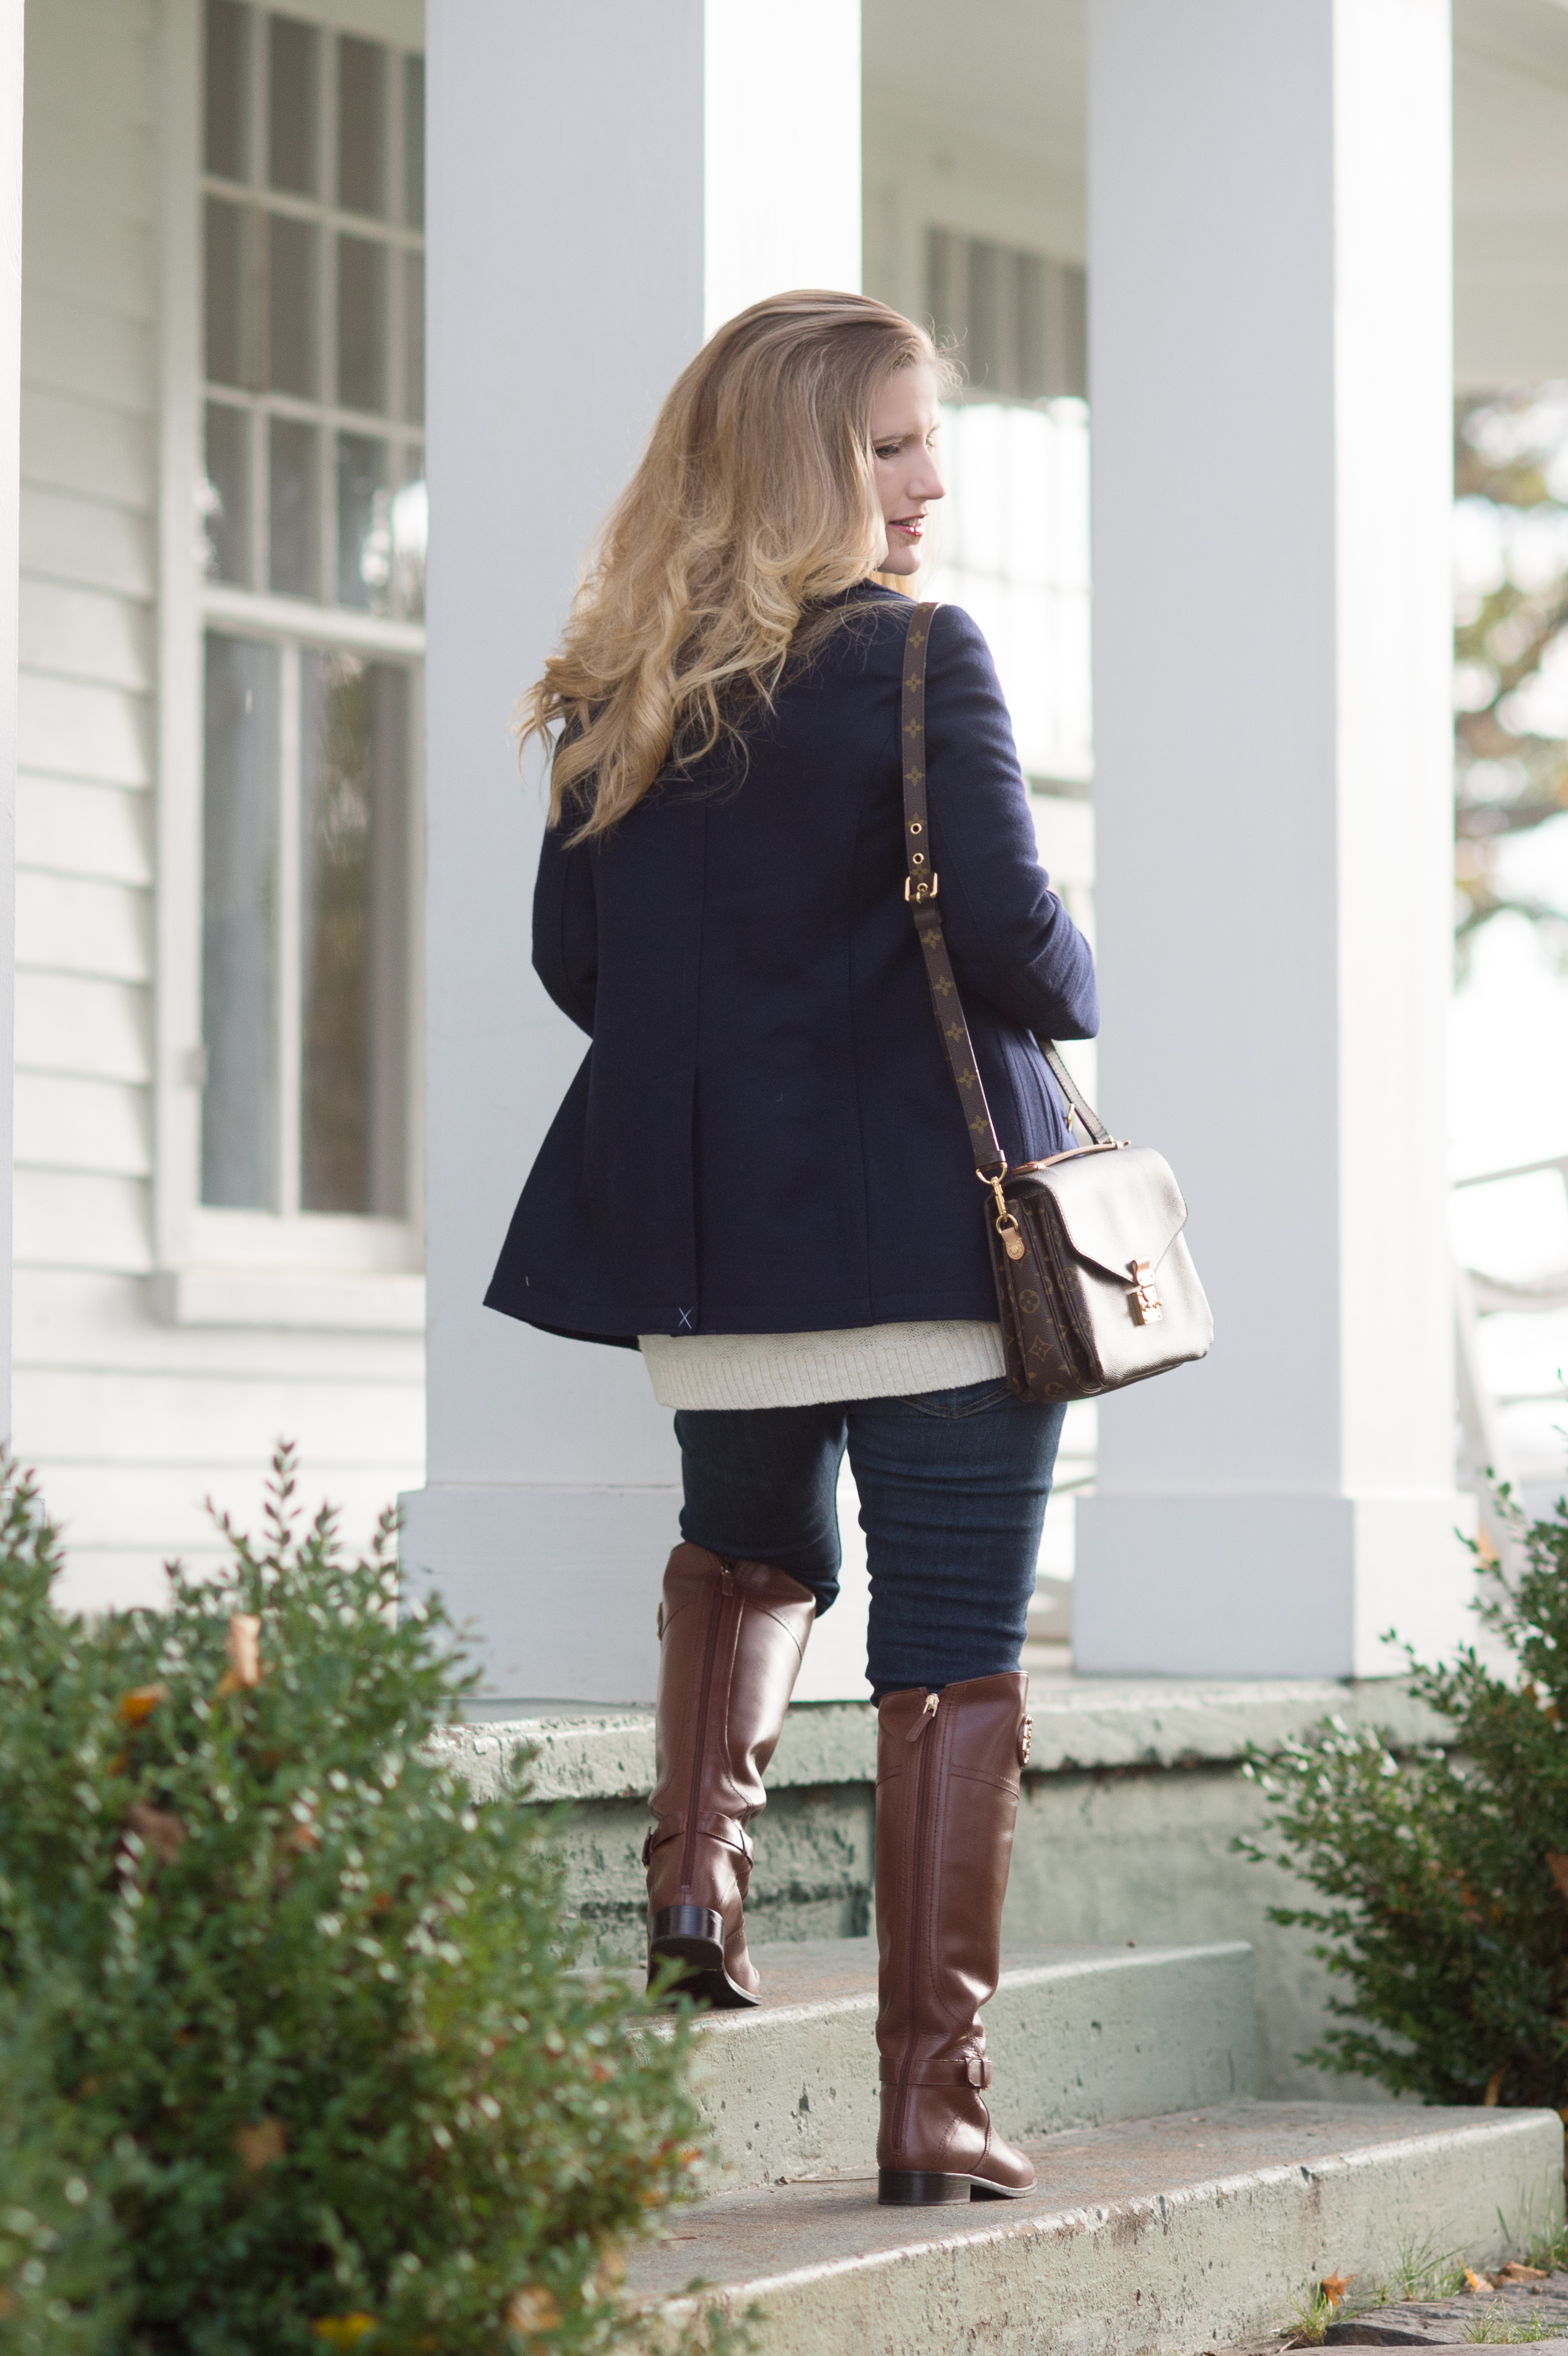 Petite Fashion and Style Blog, J.Crew Andover Peacoat, J.Crew Perfect  Shirt in Navy Plaid, Tory Burch Riding Boots